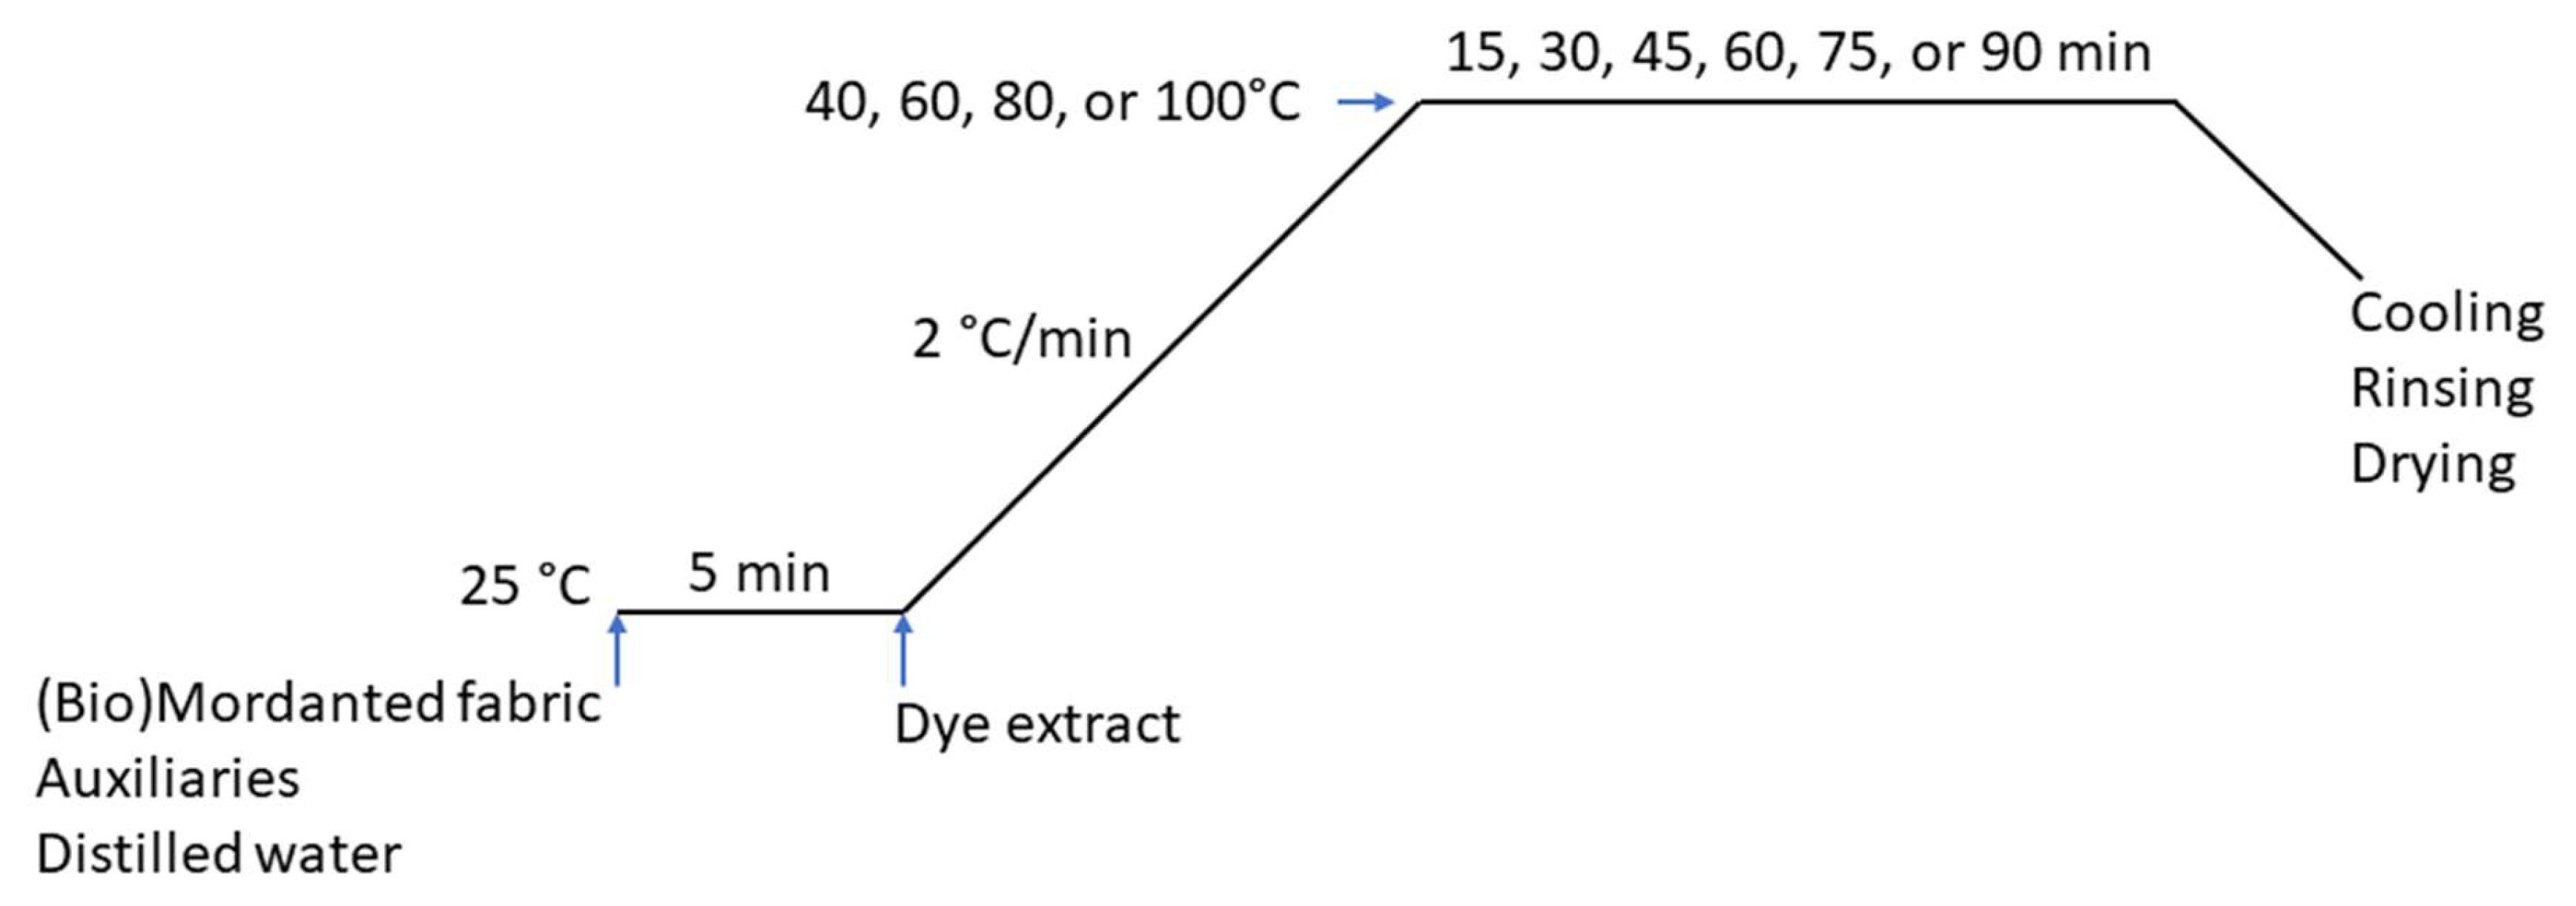 Dyeing profile of polyester/nylon used in this study.